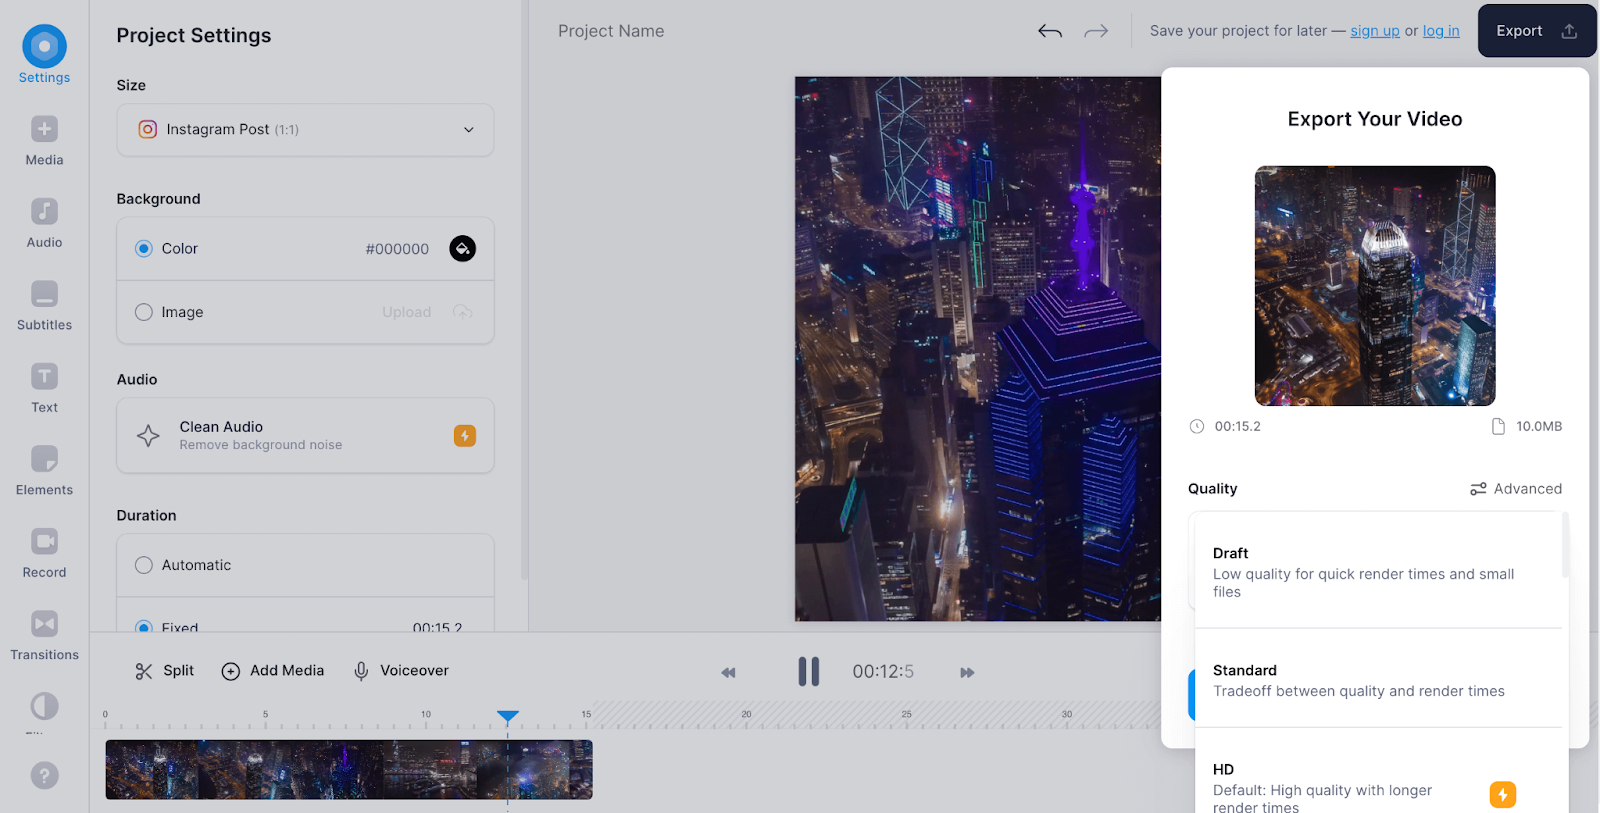 How to share a YouTube video on Instagram: Export the edited video